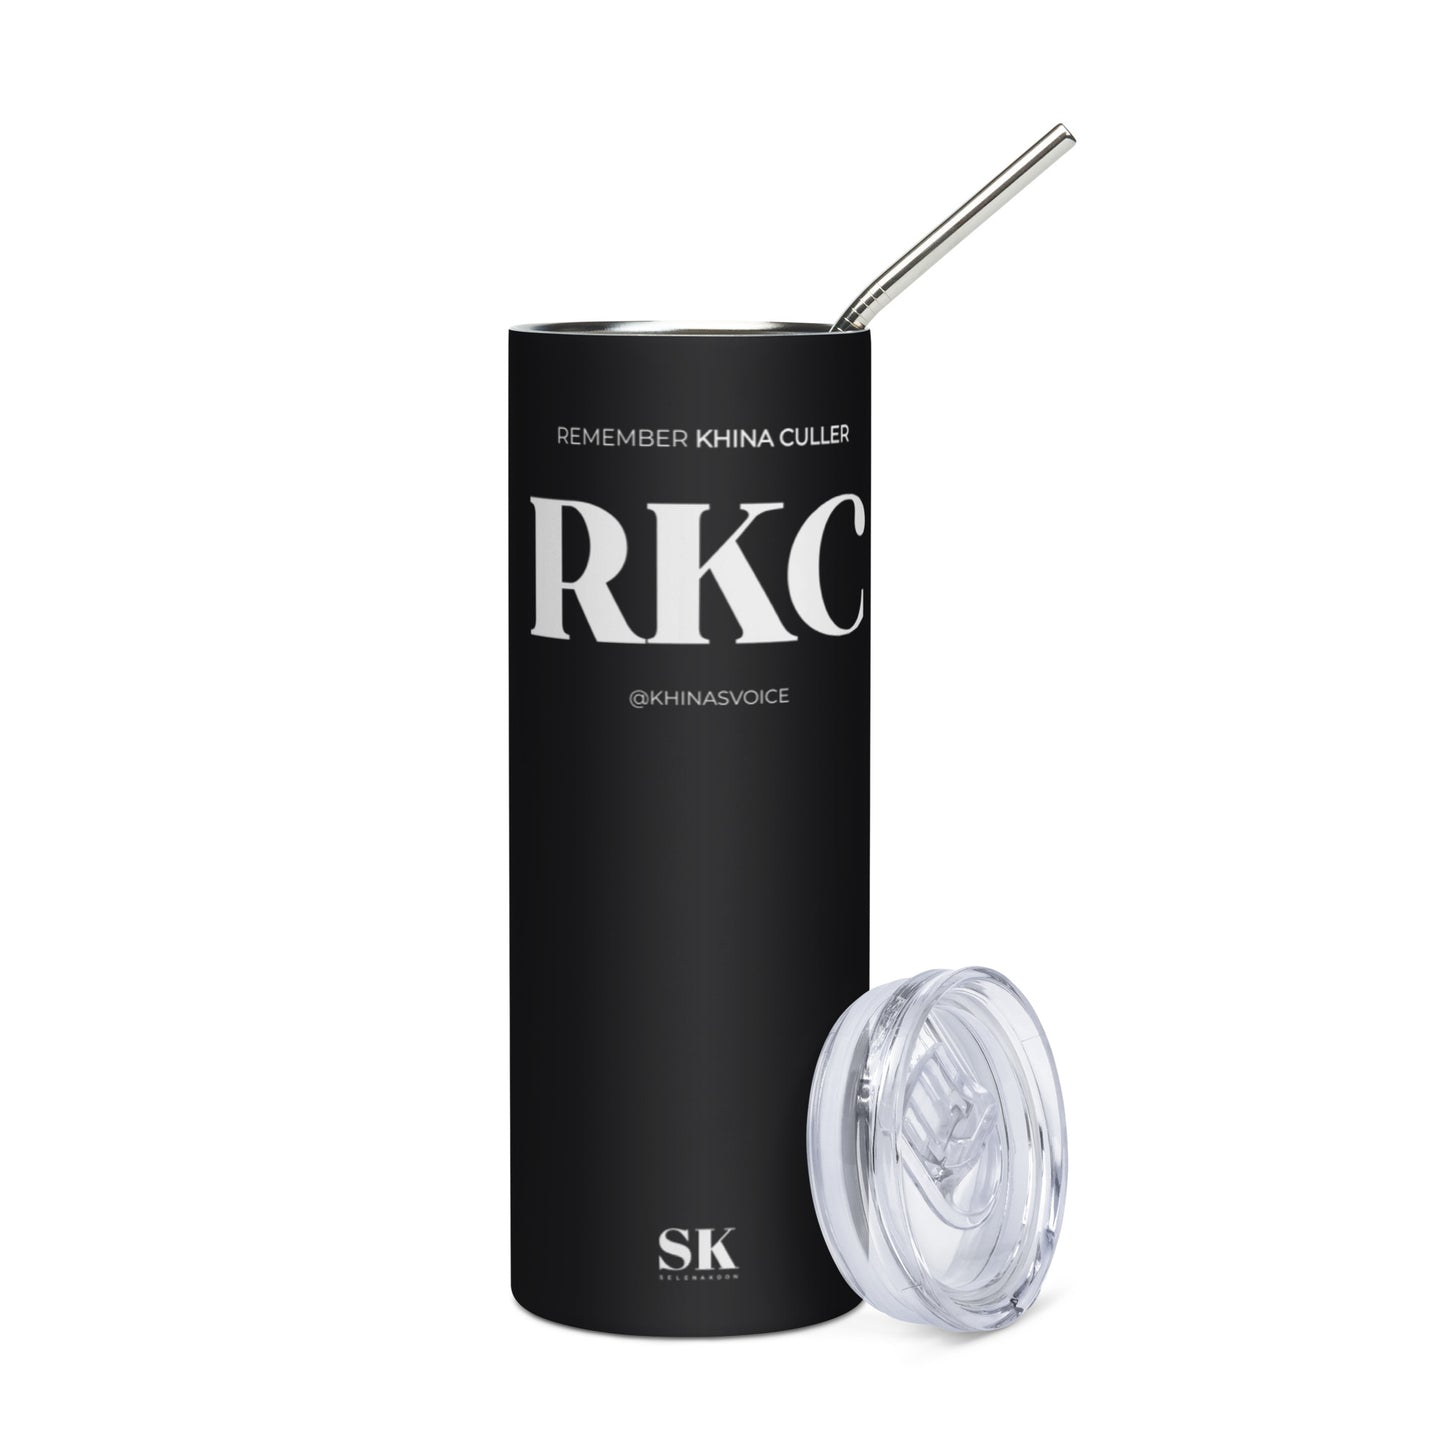 Official Stainless steel tumbler